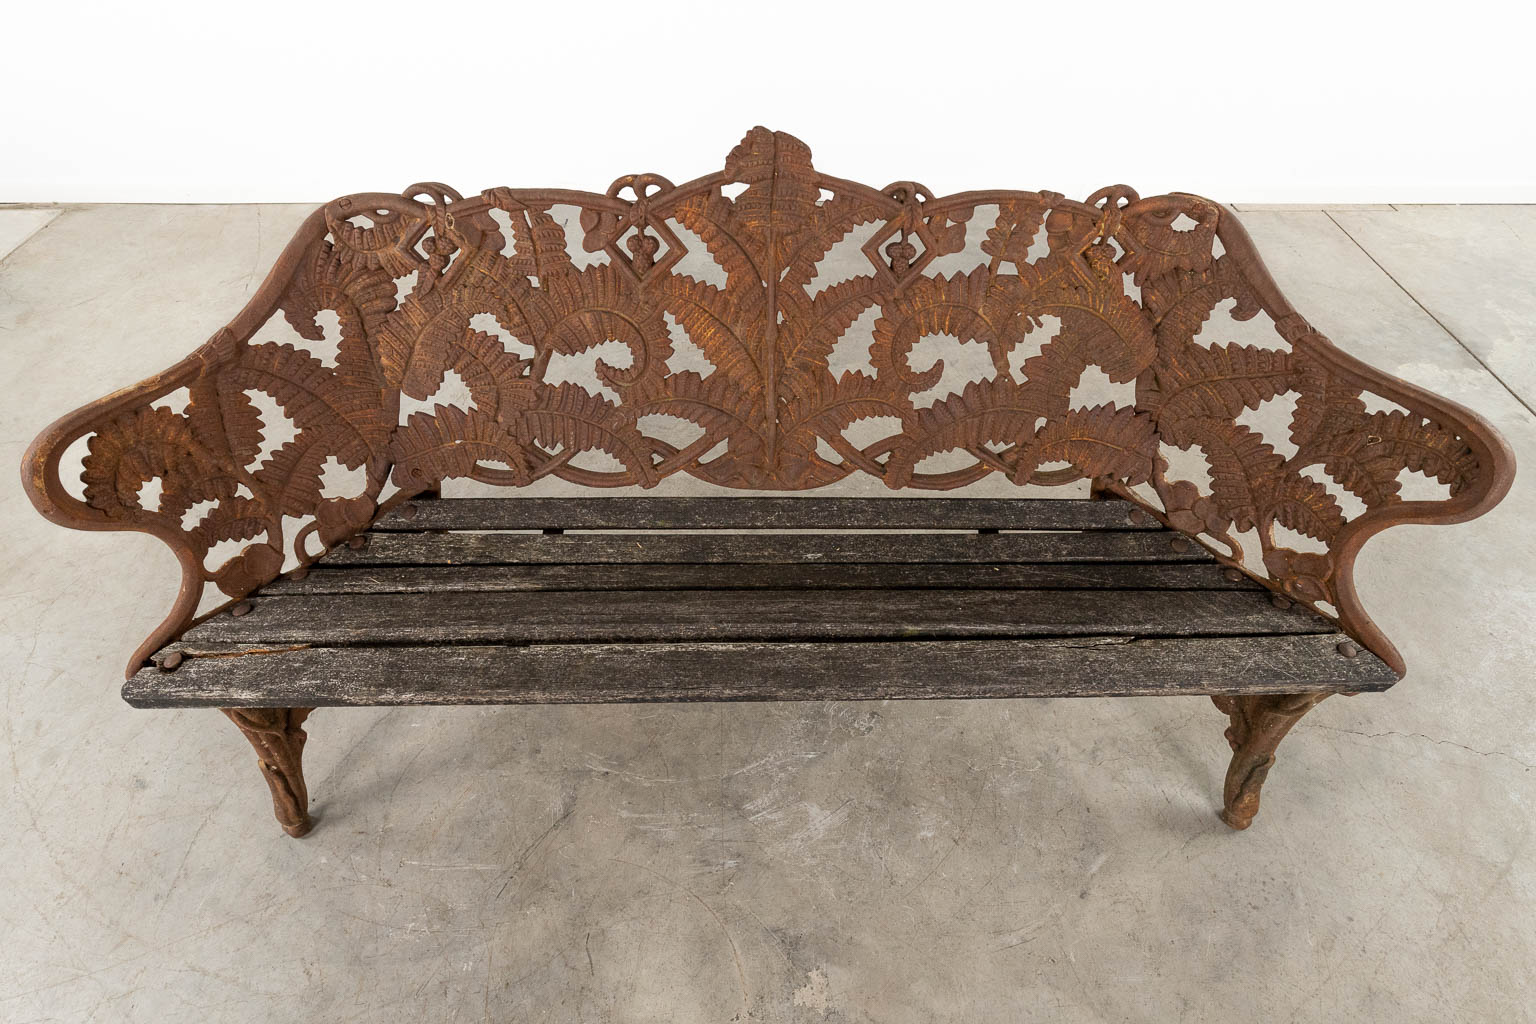 A cast-iron garden bench, decorated with fern leaves. 20th C. (D:53 x W:166 x H:88 cm)